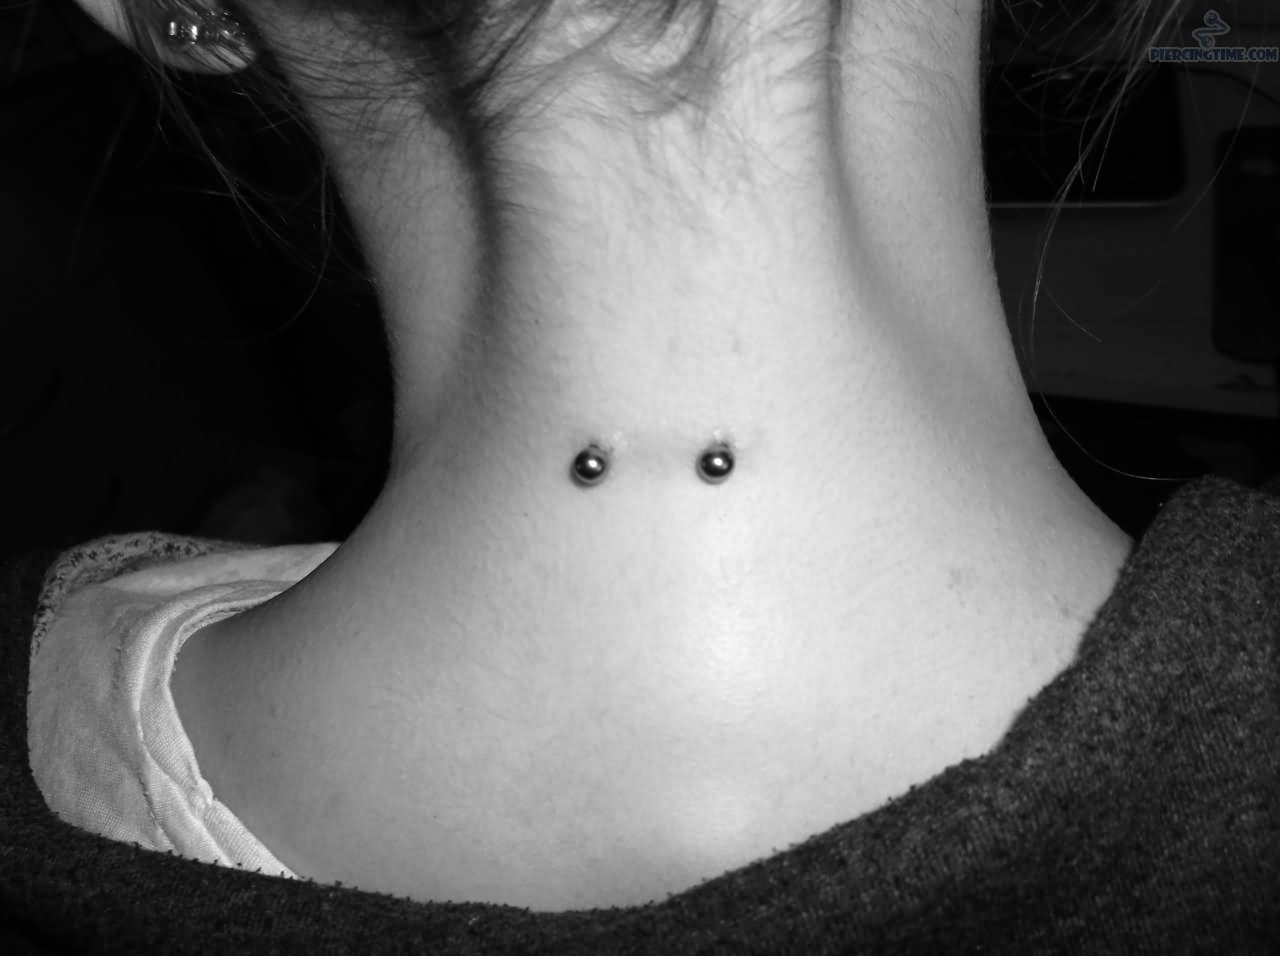 Silver Studs Neck Piercing Image